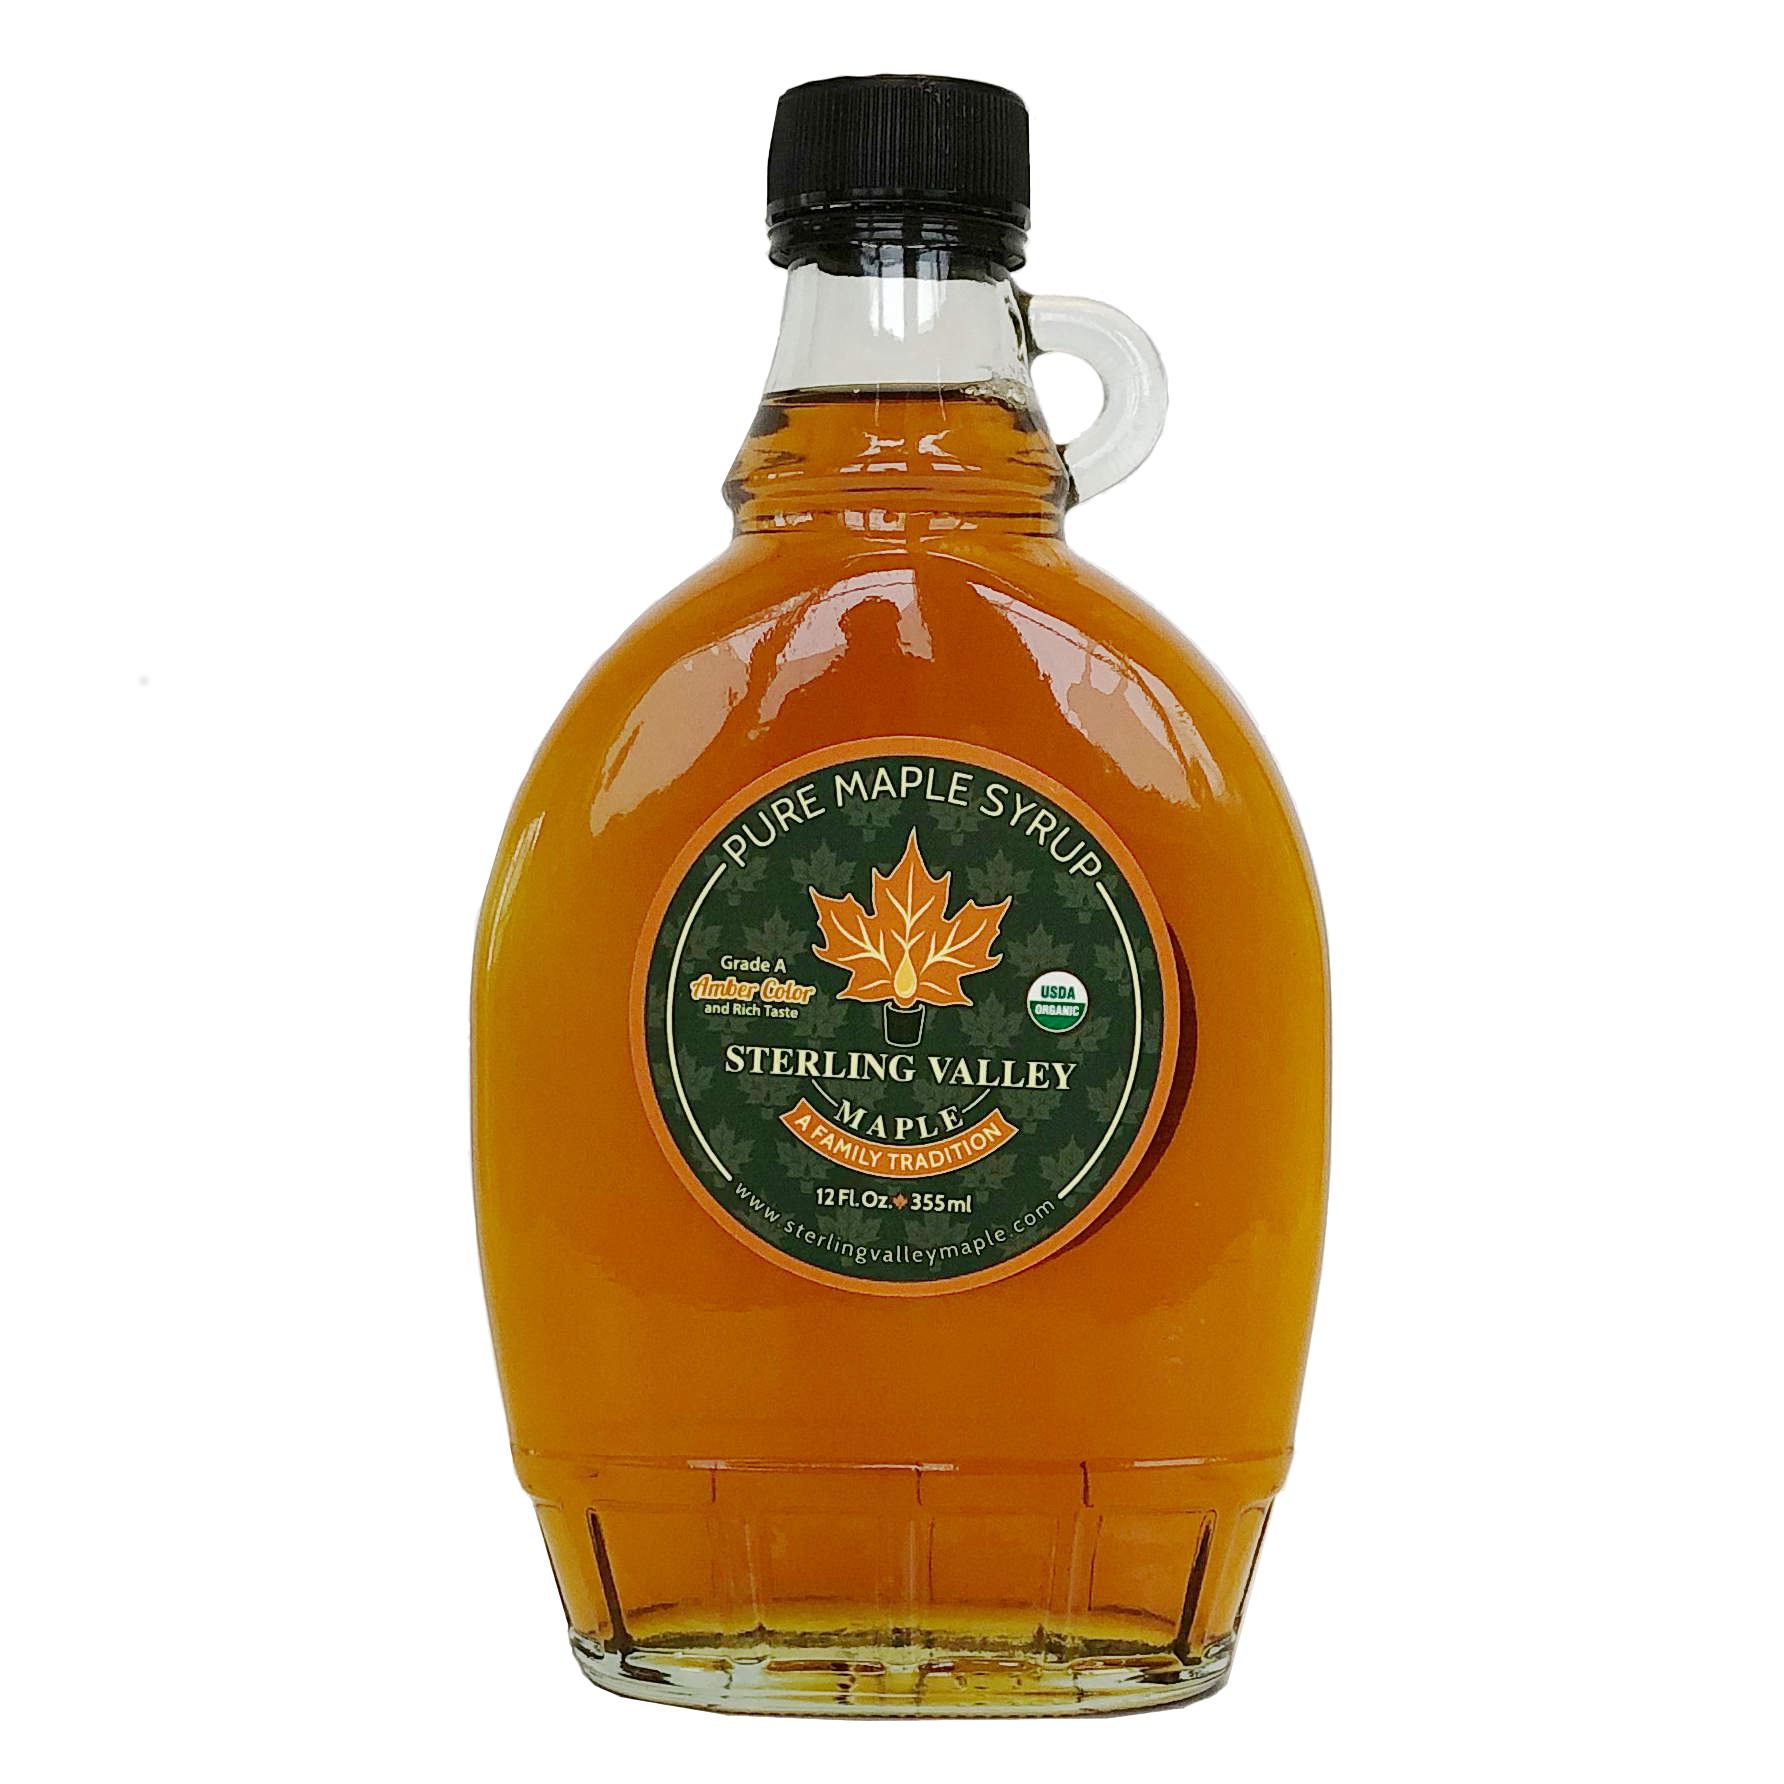 Certified Organic Syrup: 12oz Glass Container of Maple Syrup